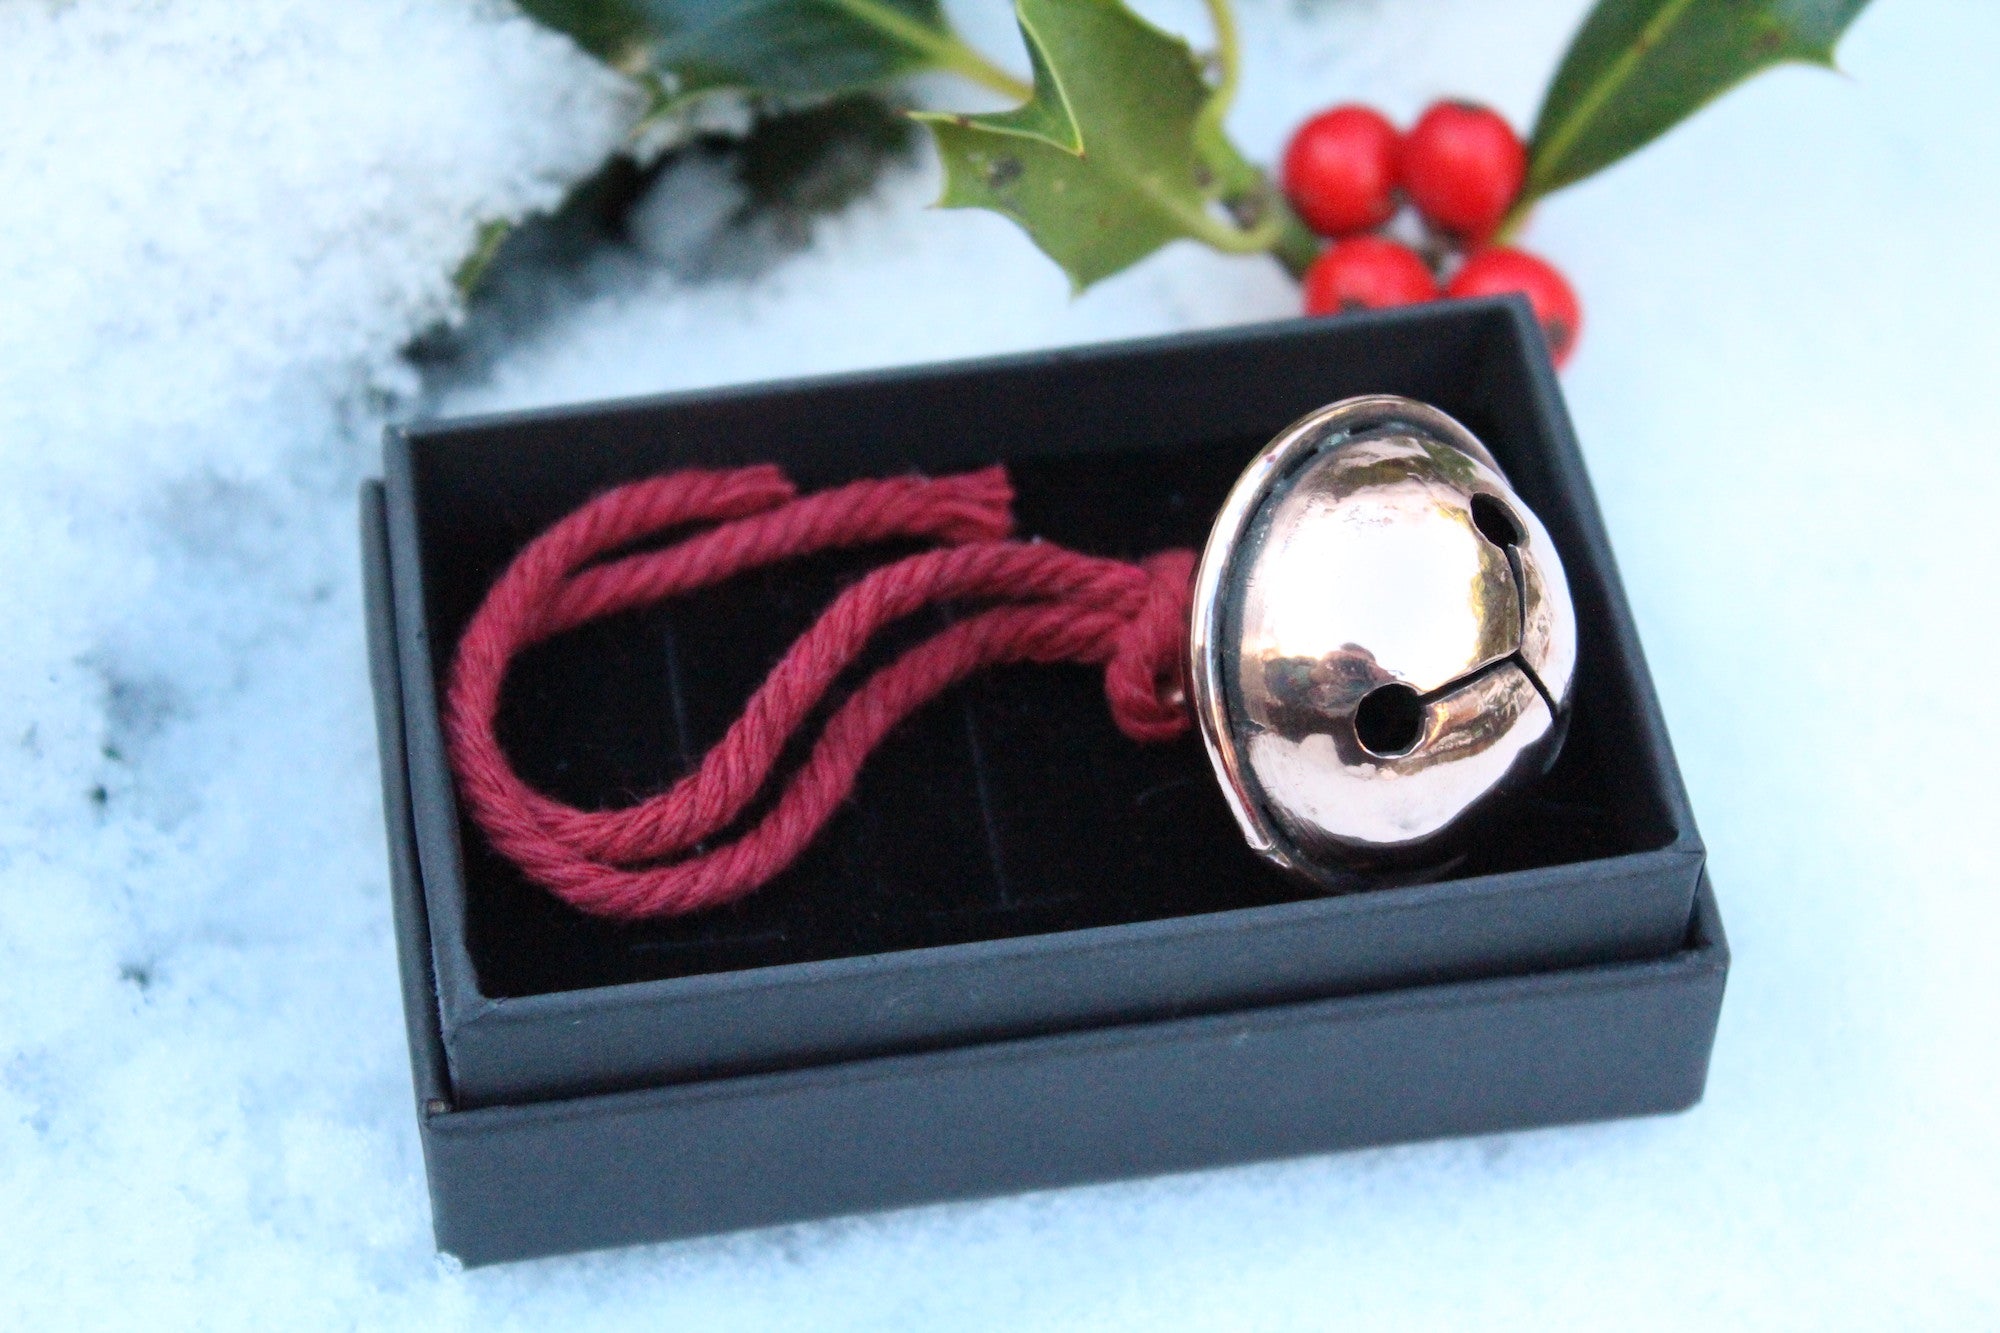 SOLSTICE BELL - Handmade Copper Jingle Bell Ornament (Made to Order)